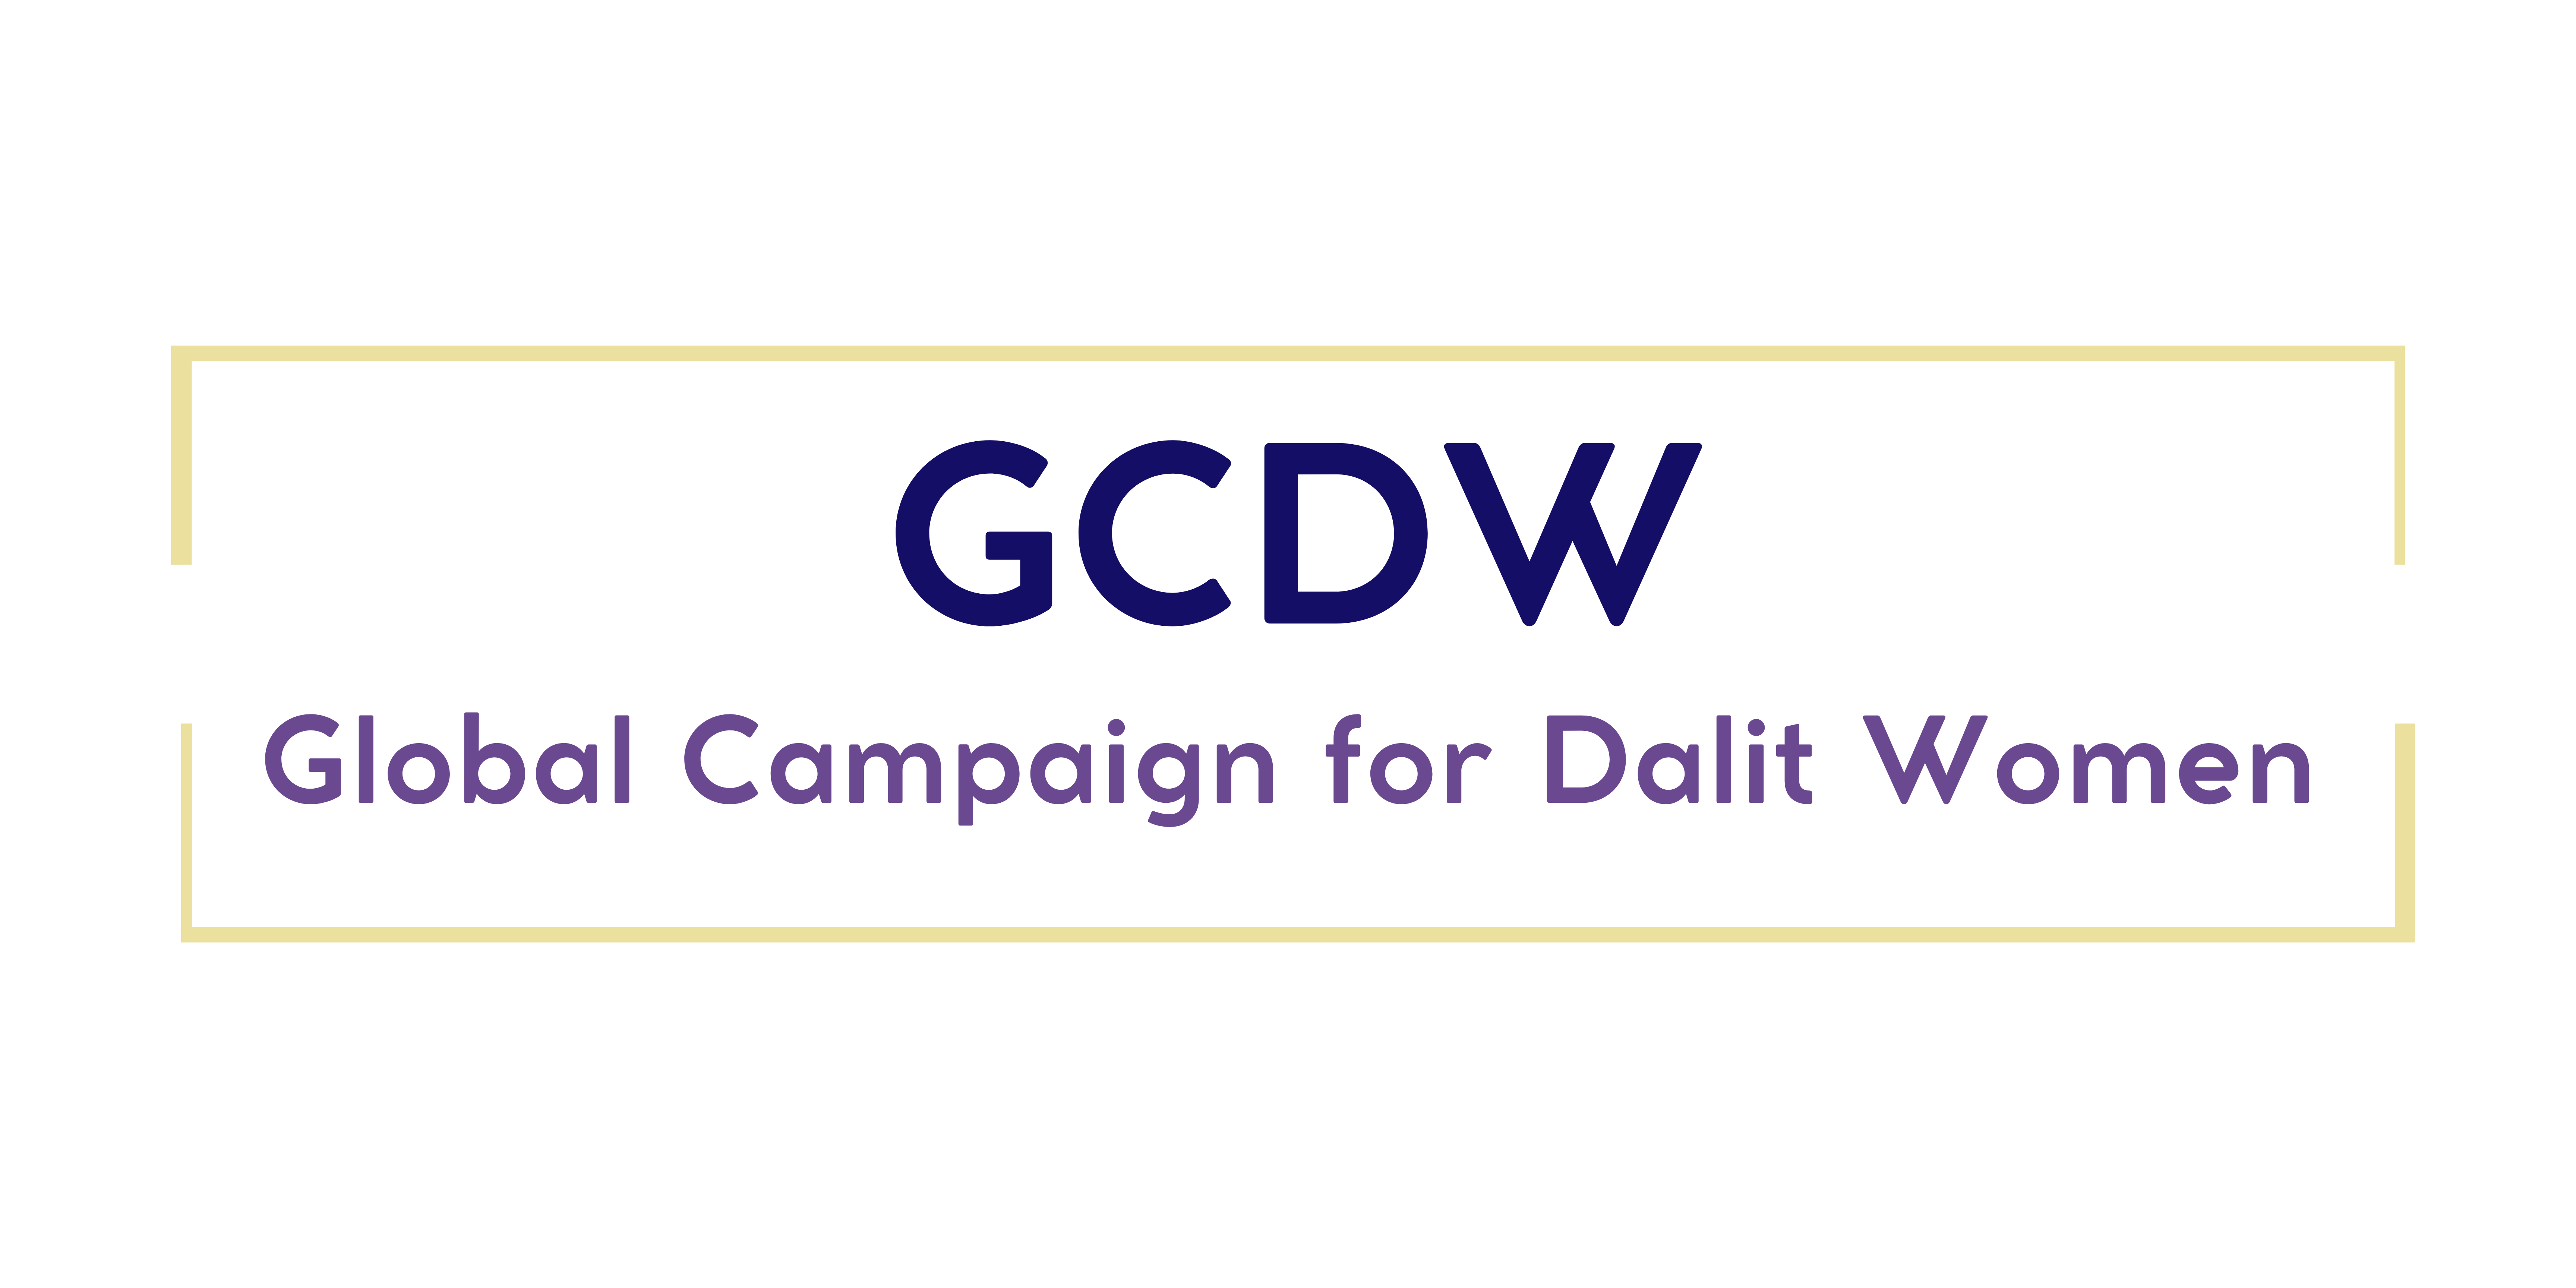 Global Campaign for Dalit Women